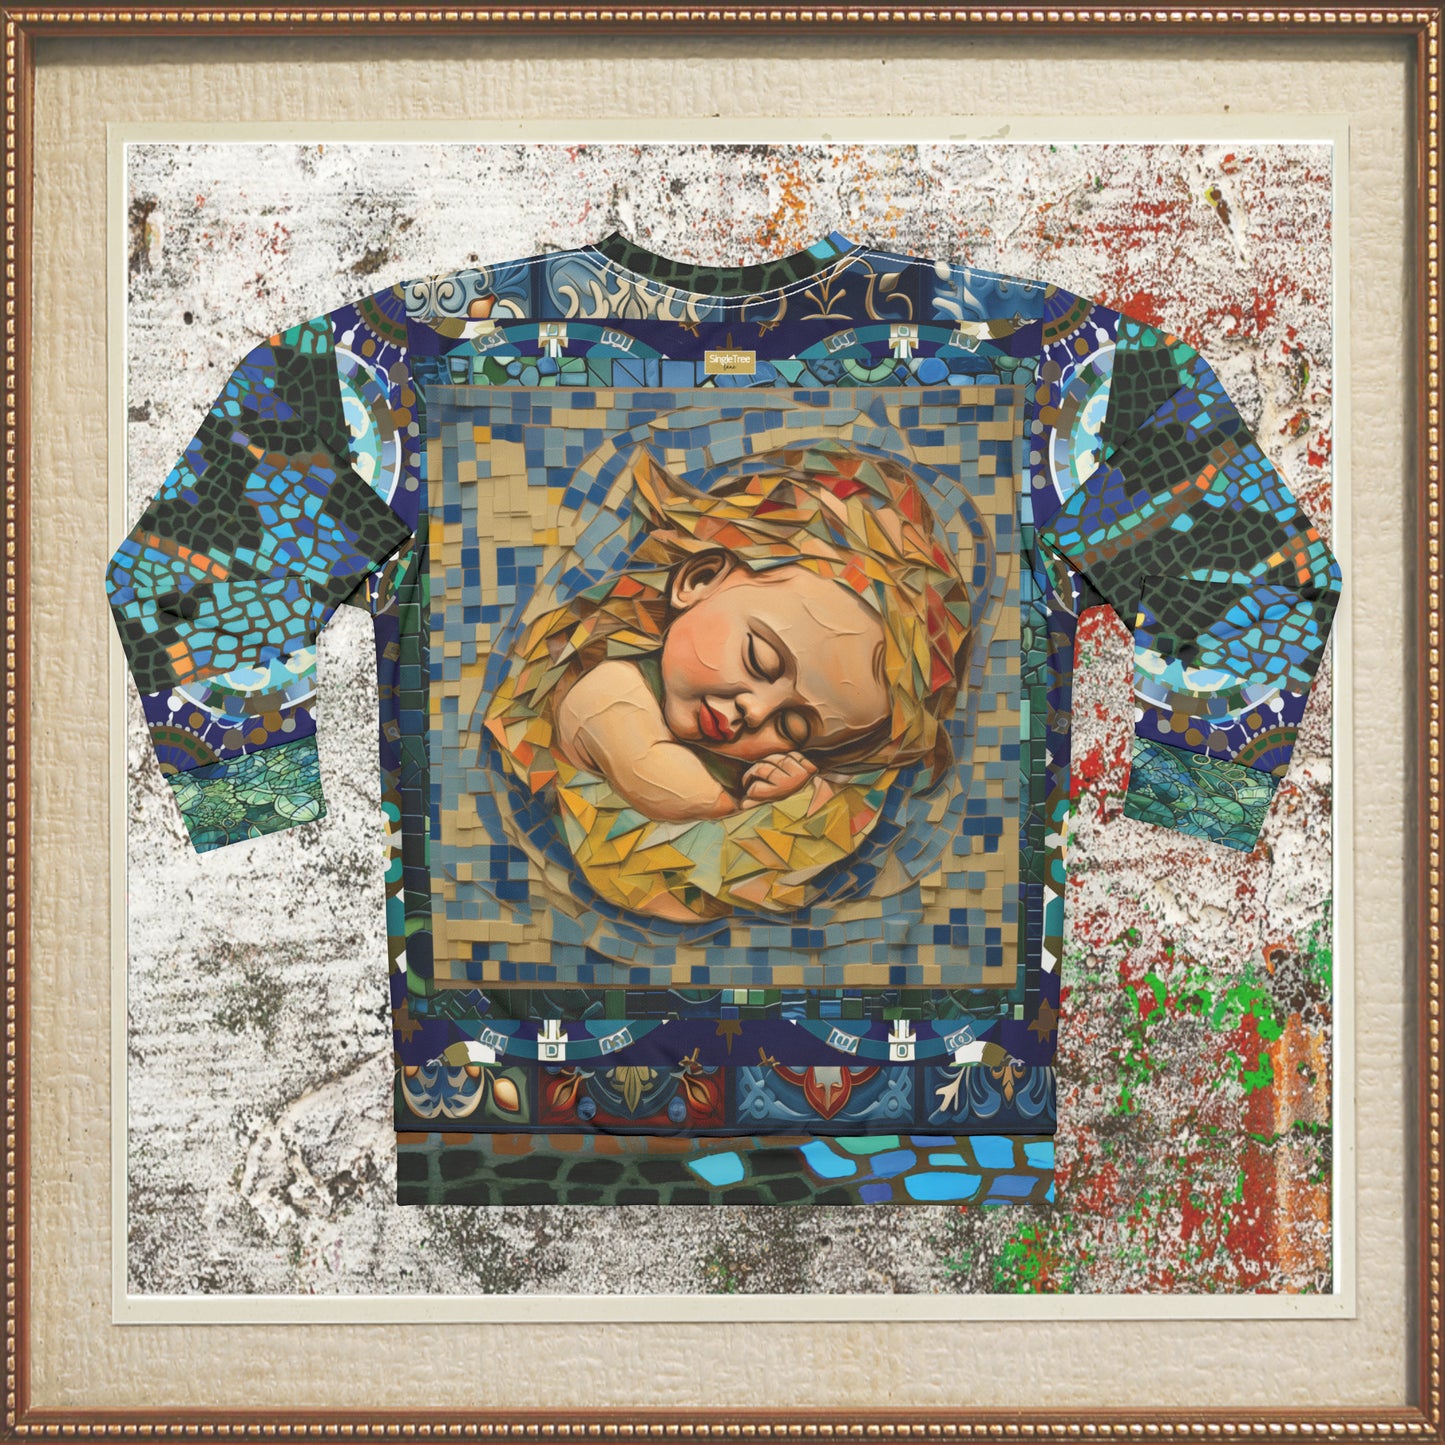 Babe in Arms Abstract Mosaic Unisex Sweatshirt